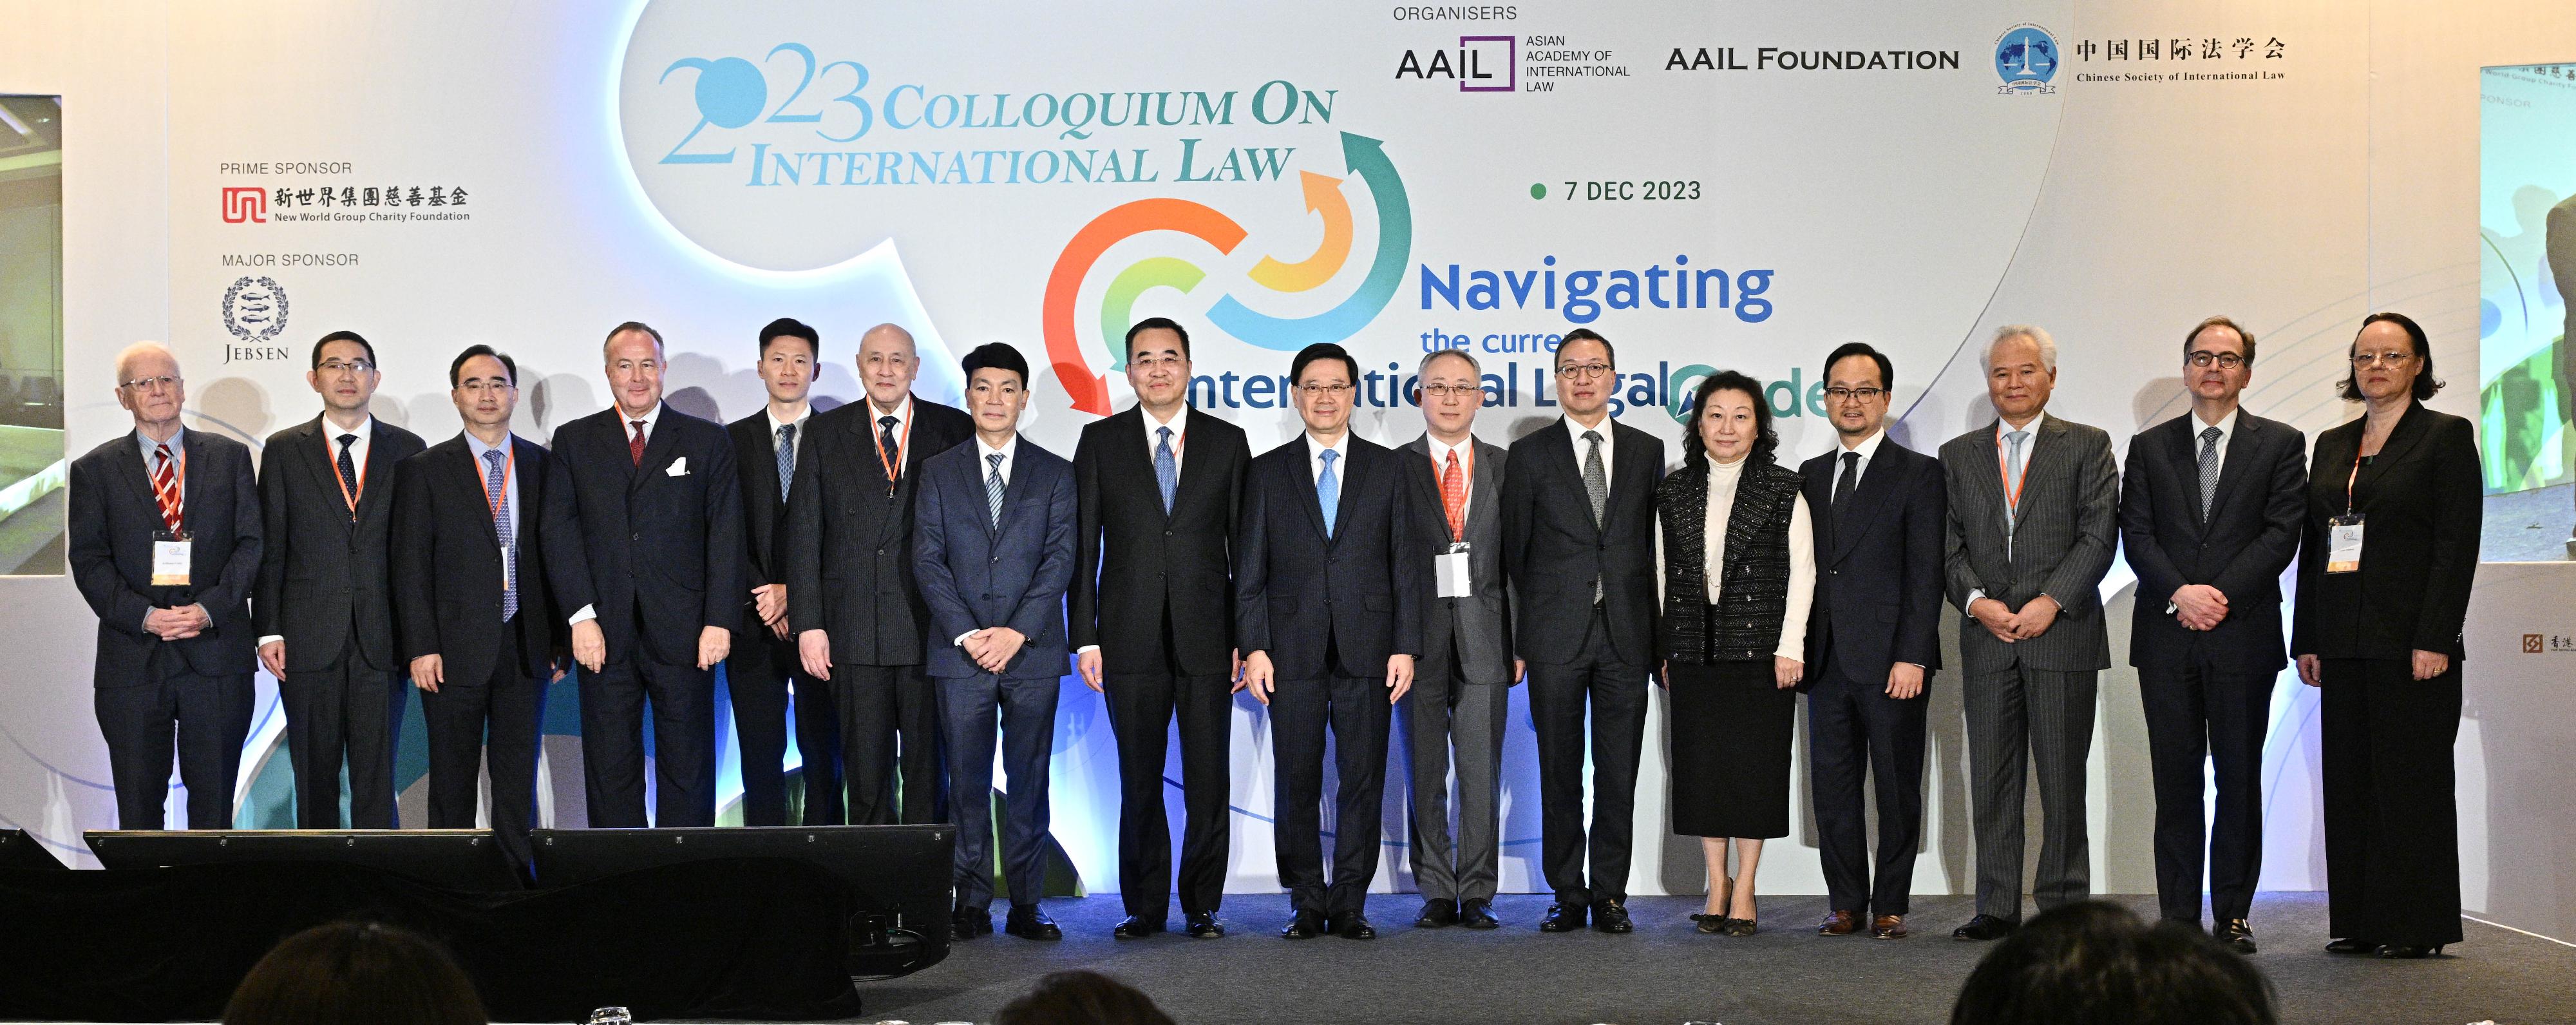 The Chief Executive, Mr John Lee, attended the 2023 Colloquium on International Law today (December 7). Photo shows Mr Lee (eighth right); the Acting Commissioner of the Office of the Commissioner of the Ministry of Foreign Affairs of the People's Republic of China in the Hong Kong Special Administrative Region, Mr Li Yongsheng (seventh right); the Director-General of the Department of Treaty and Law of the Ministry of Foreign Affairs, Mr Ma Xinmin (eighth left); the Secretary for Justice, Mr Paul Lam, SC (sixth right); Co-Chairman of the Asian Academy of International Law Ms Teresa Cheng, SC (fifth right); Co-Chairman of the Asian Academy of International Law Dr Anthony Neoh (sixth left); the President of the Chinese Society of International Law, Professor Huang Jin (third left); the Secretary-General of the Asian-African Legal Consultative Organization, Dr Kamalinne Pinitpuvadol (seventh left), and other guests at the colloquium.